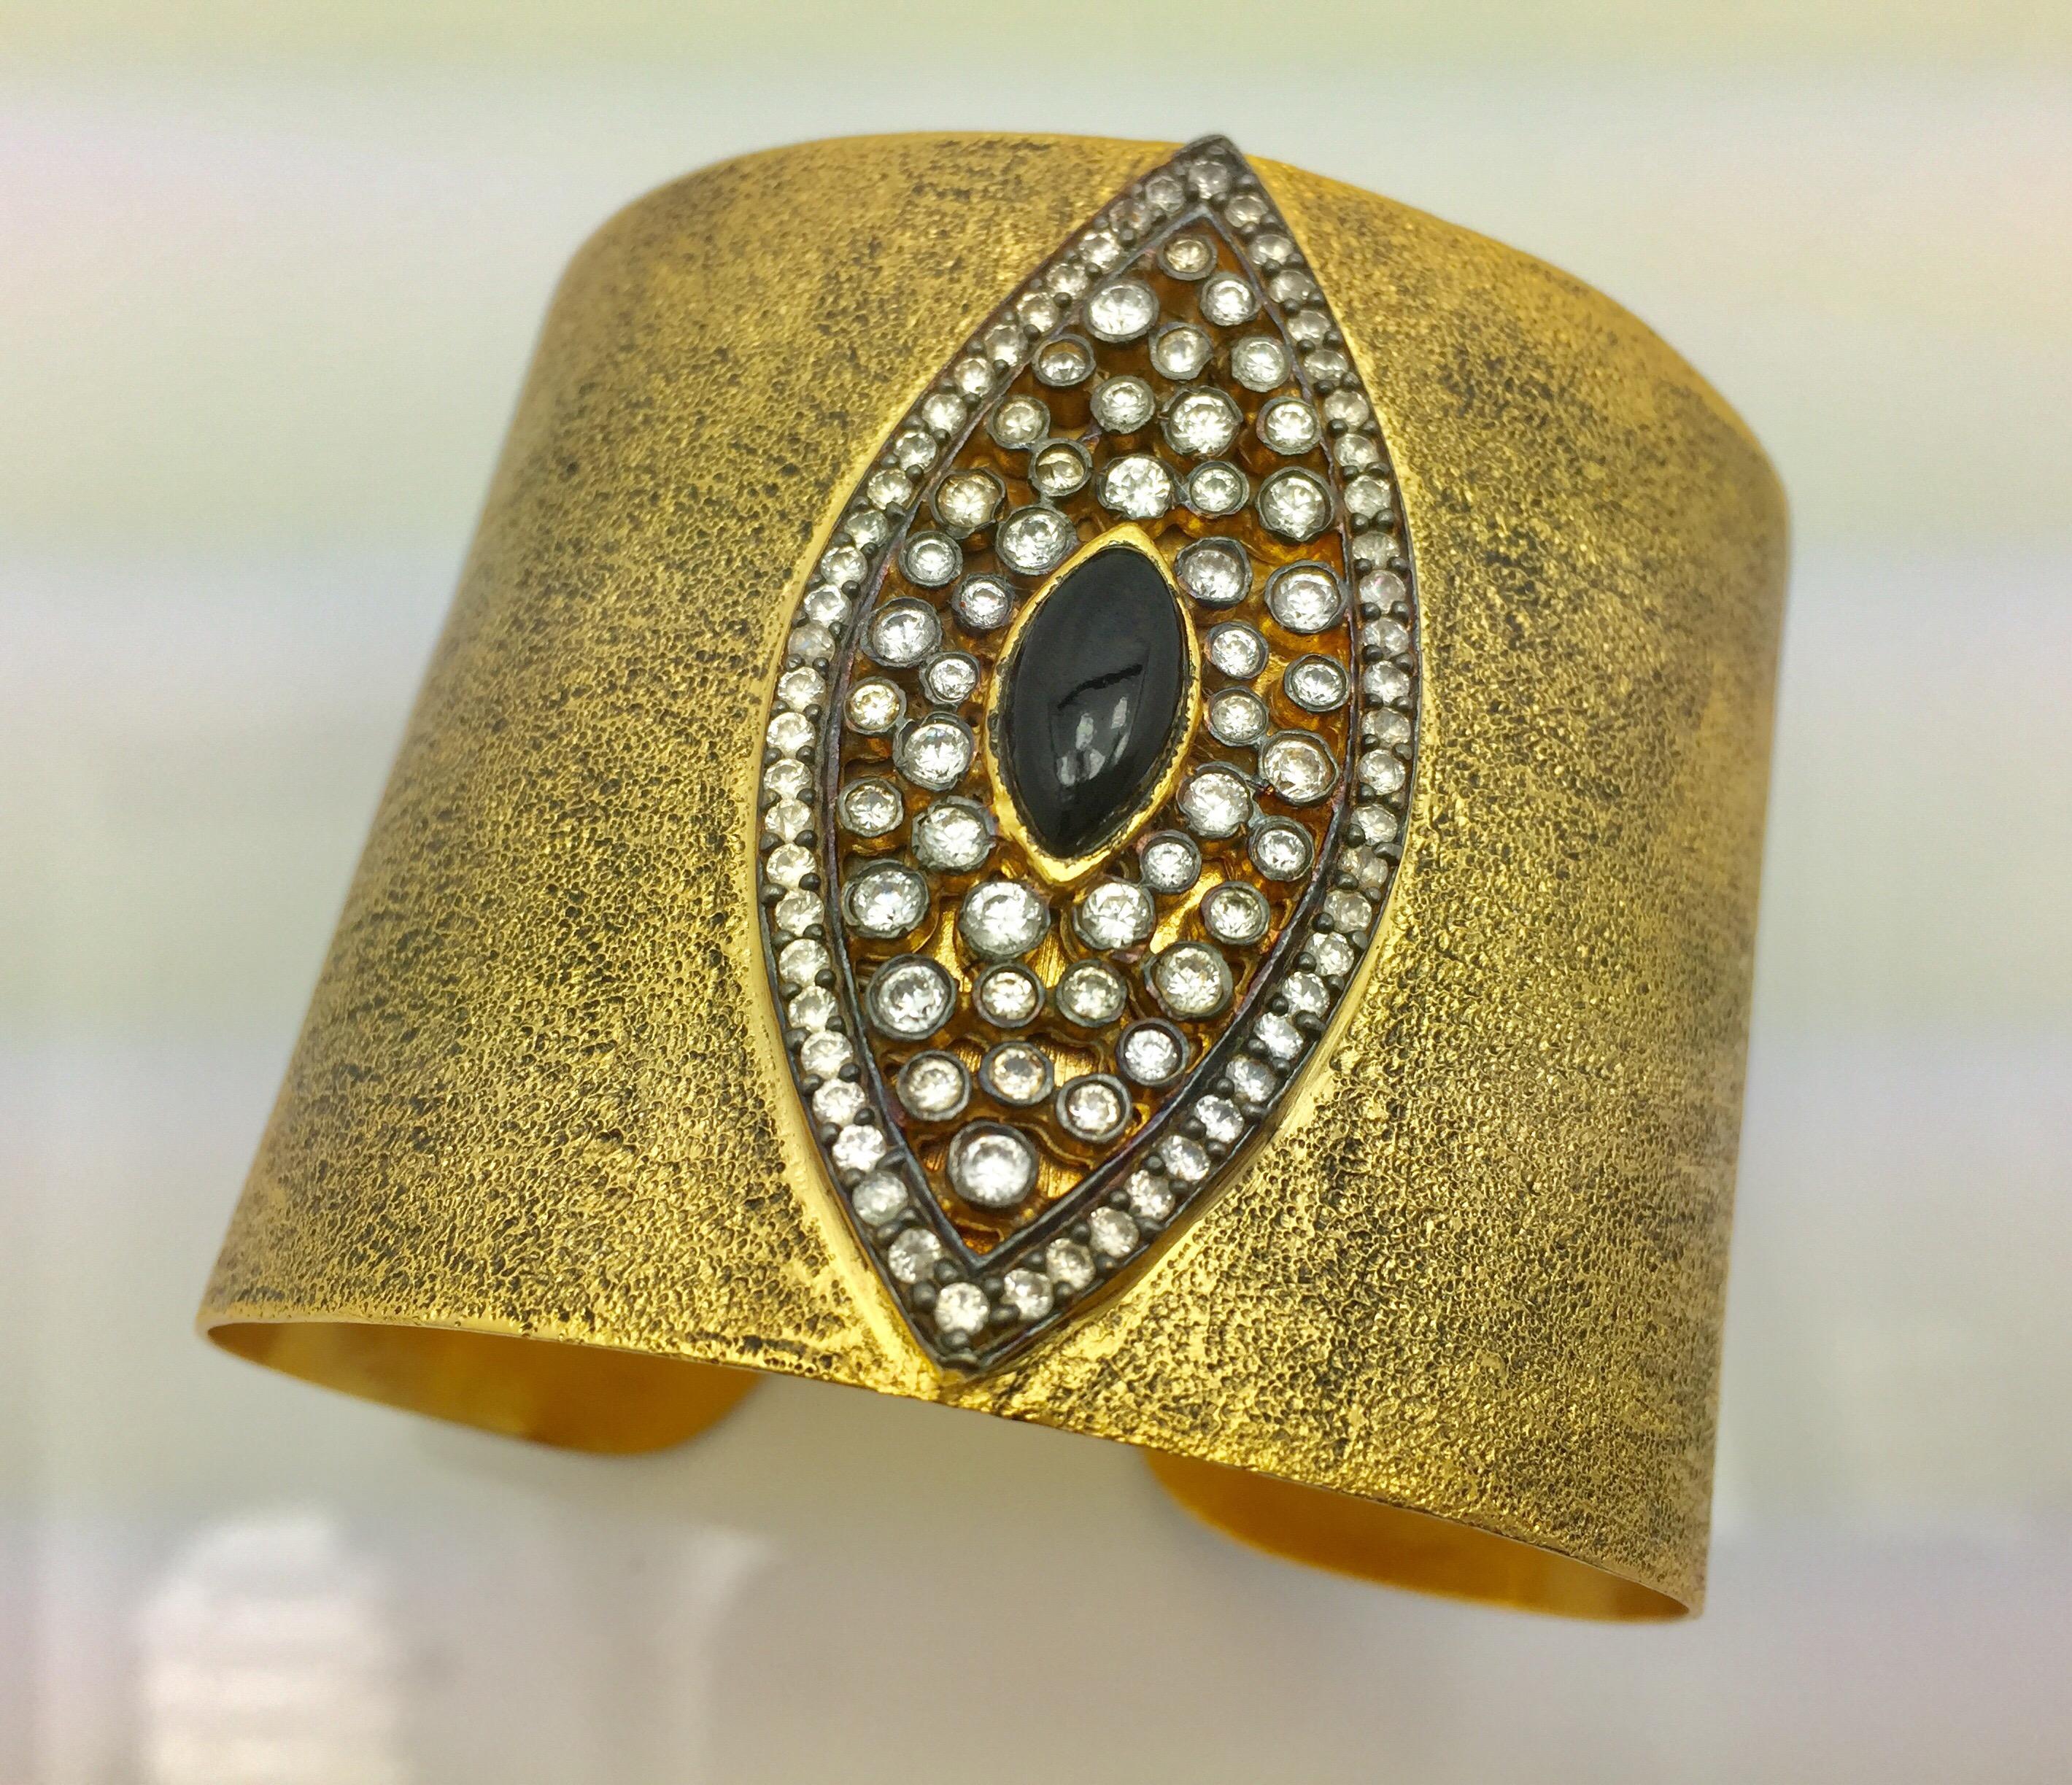 The evil eye, thought to provide protection from evil spirits is beautifully captured in this gold, black and CZ hand brushed cuff. 
The statement cuff is lavishly adorned with sparkling CZ stones.  Cuff is adjustable.

Measures approximately 2